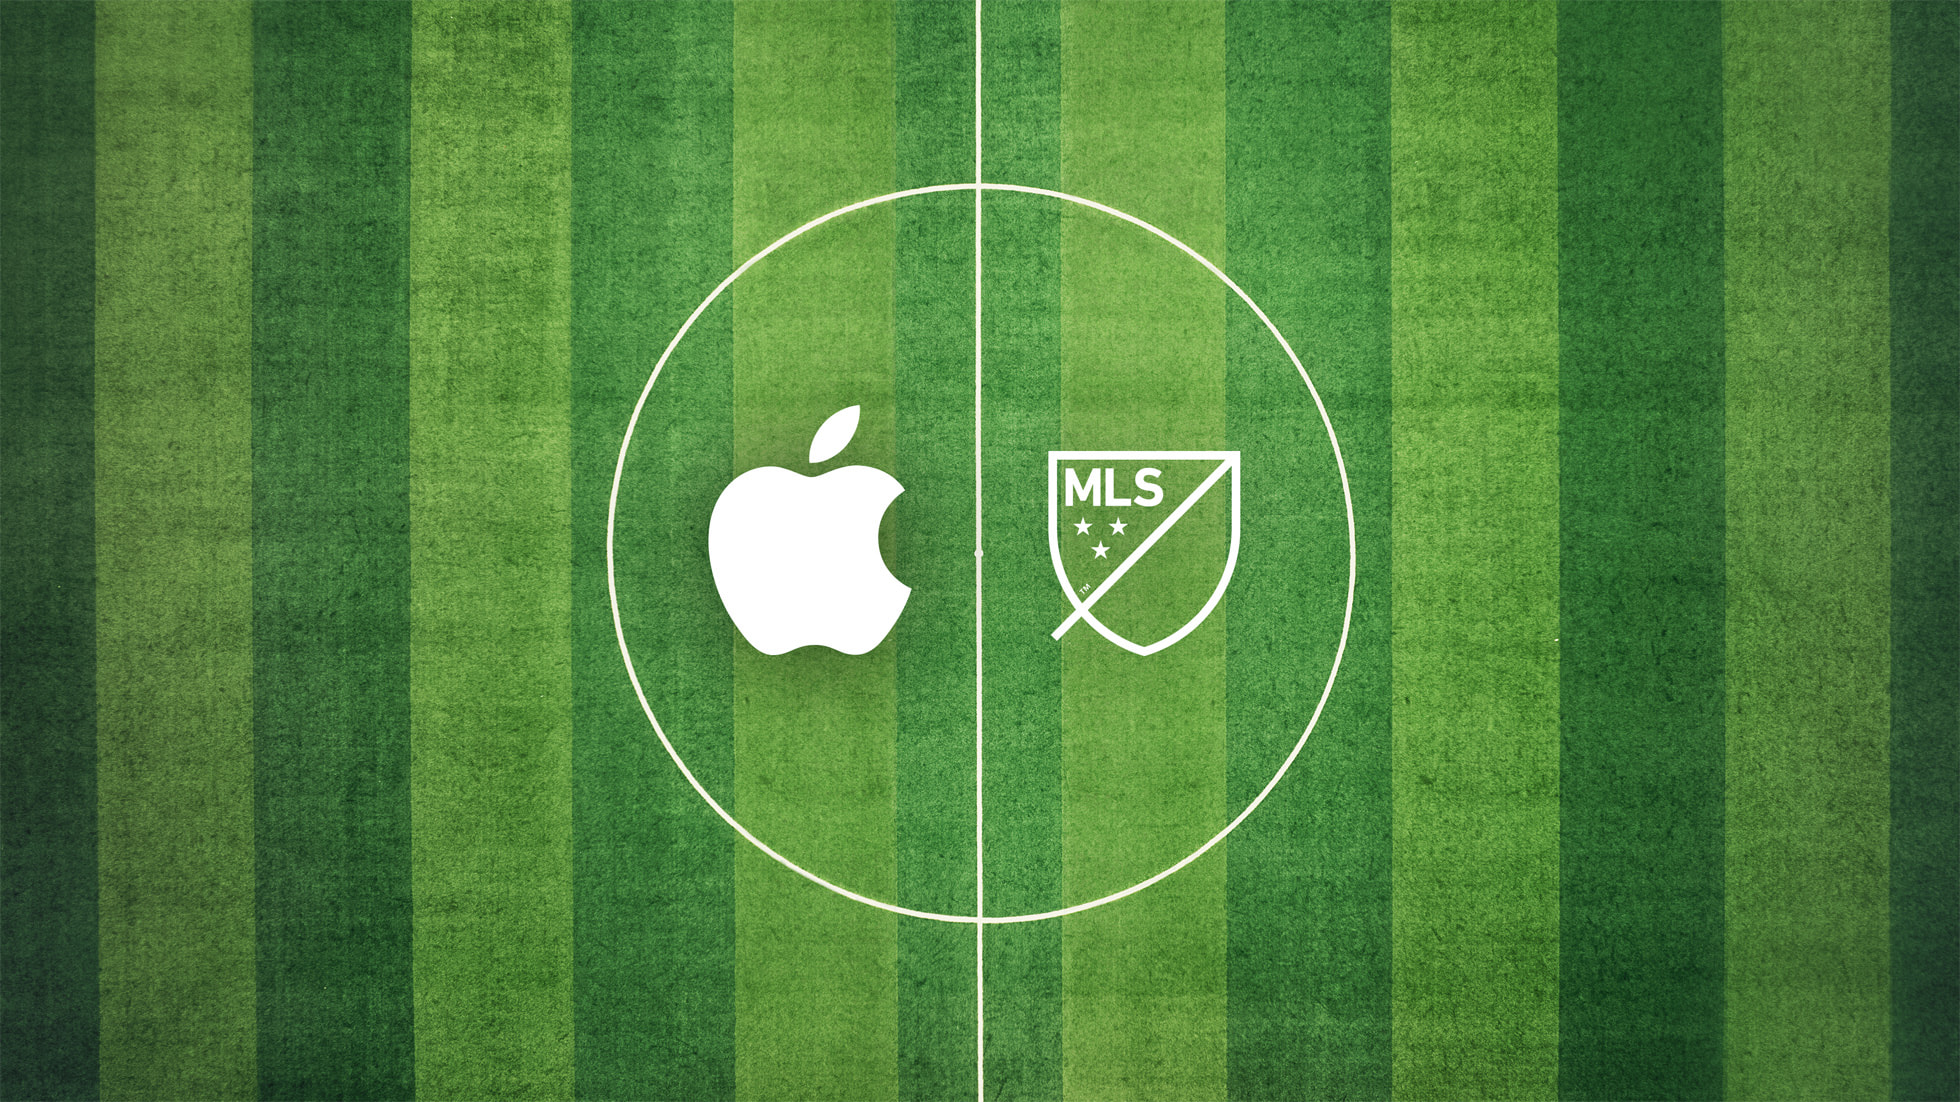 Apple to Expand Live TV Advertising for Major League Soccer Deal